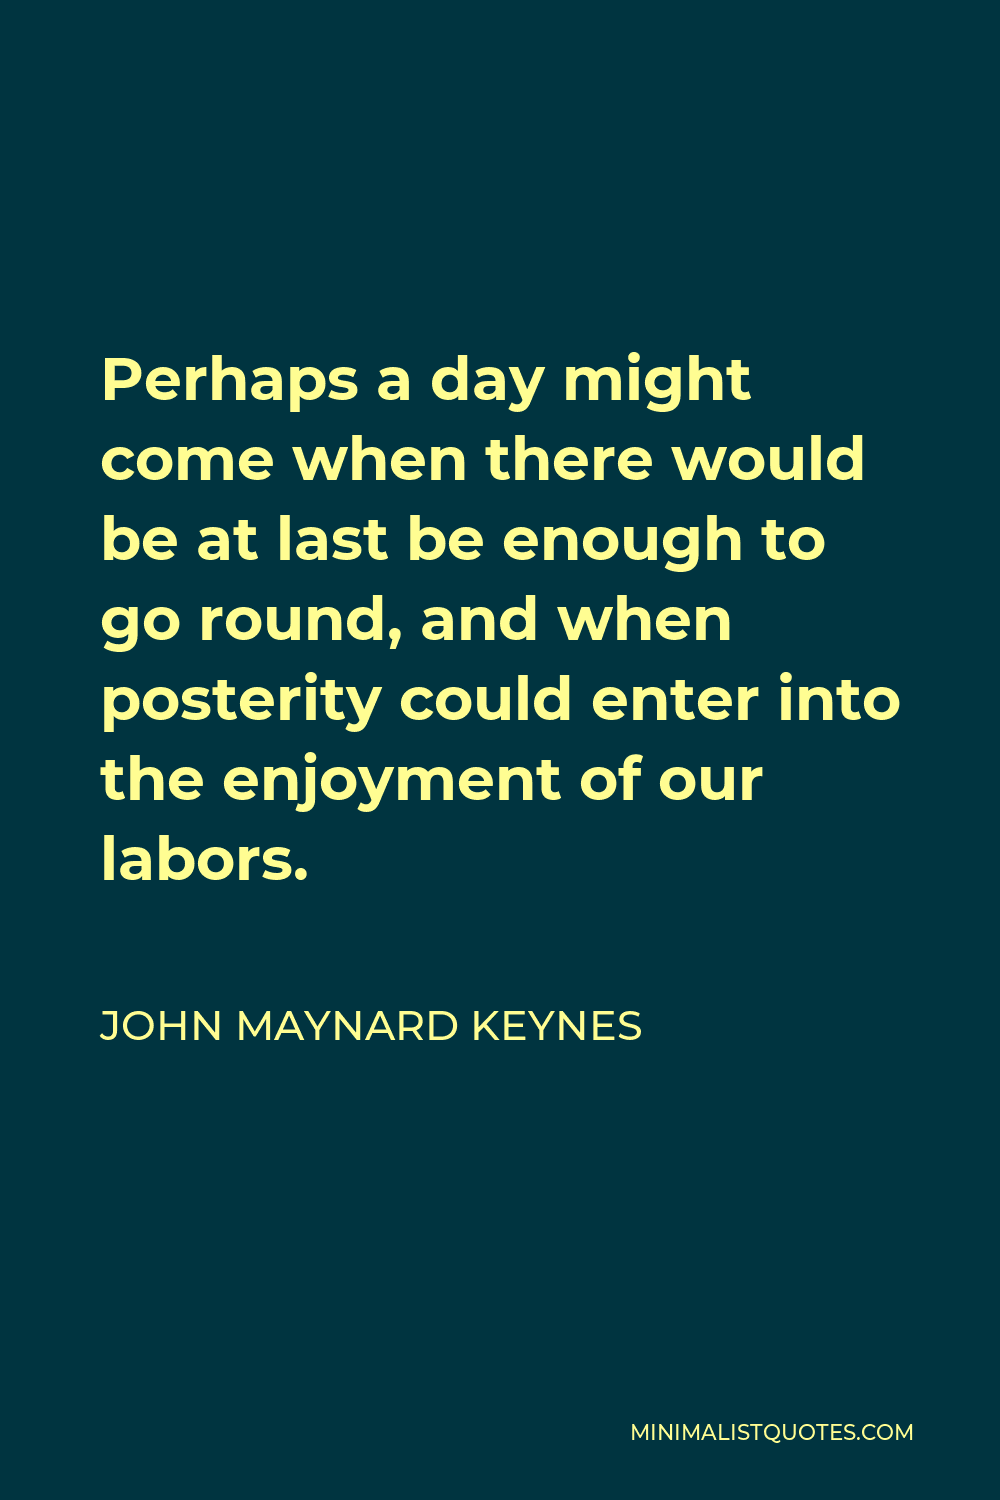 John Maynard Keynes Quote - Perhaps a day might come when there would be at last be enough to go round, and when posterity could enter into the enjoyment of our labors.